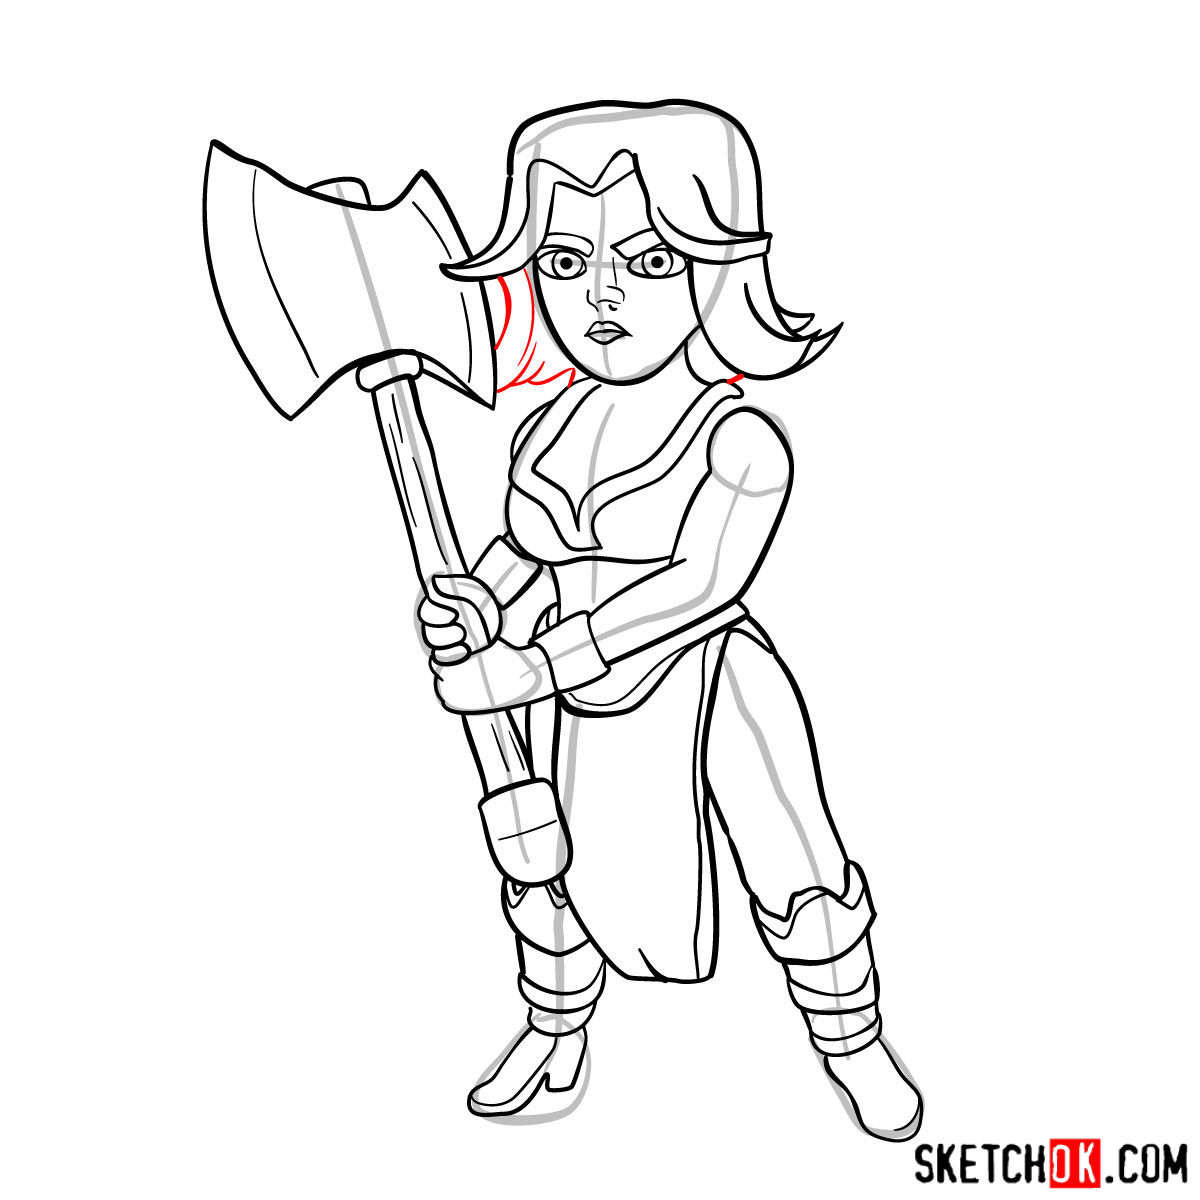 How to draw Valkyrie from Clash of Clans - step 12